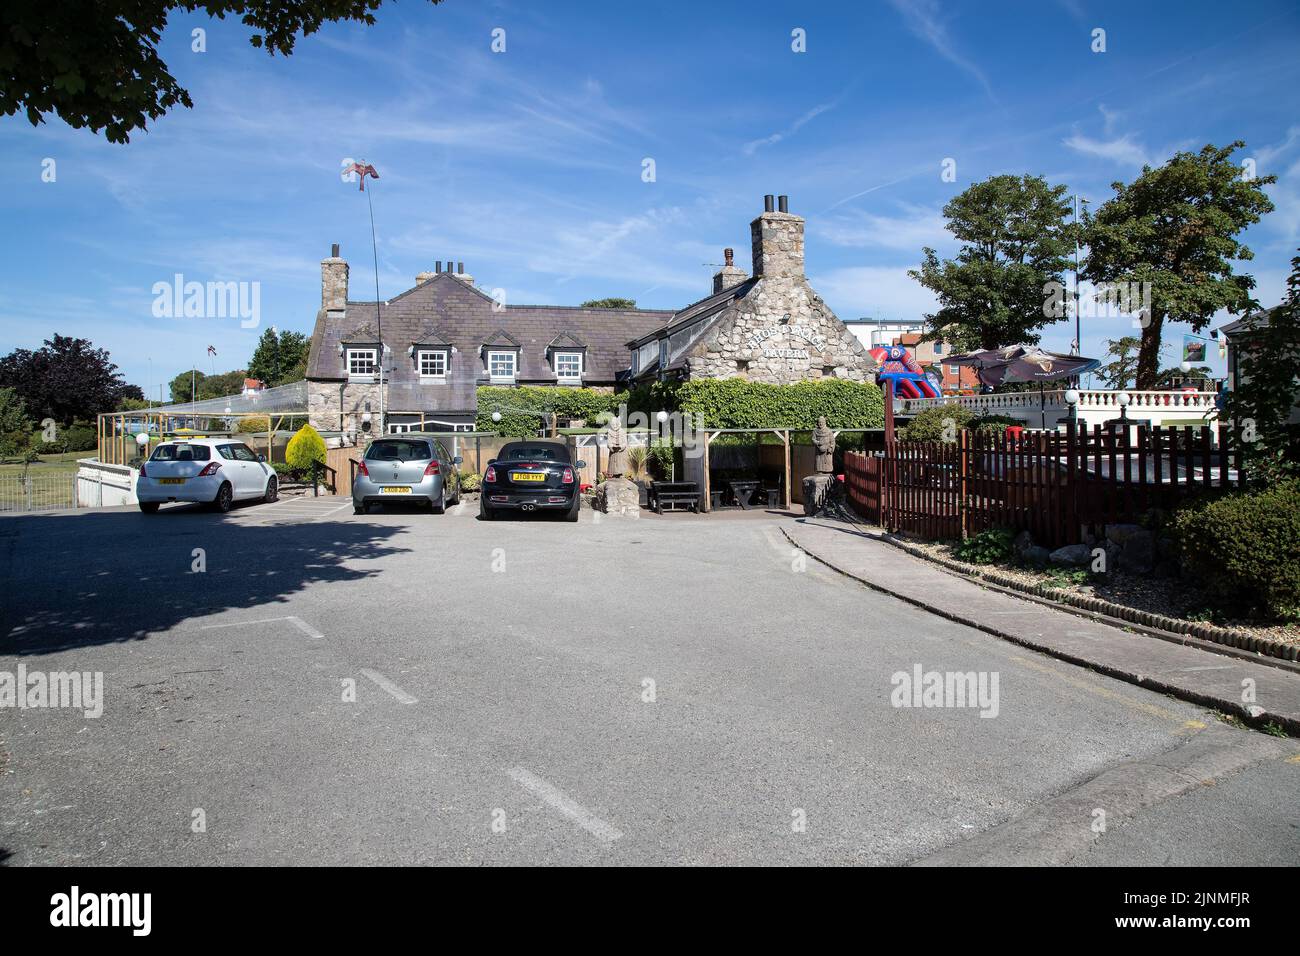 The Rhos Fynach Tavern meaning 'Monk's Marsh' a restored pub originally a 12th century monastery home to the monks who fished the weir off Rhos Point. Stock Photo